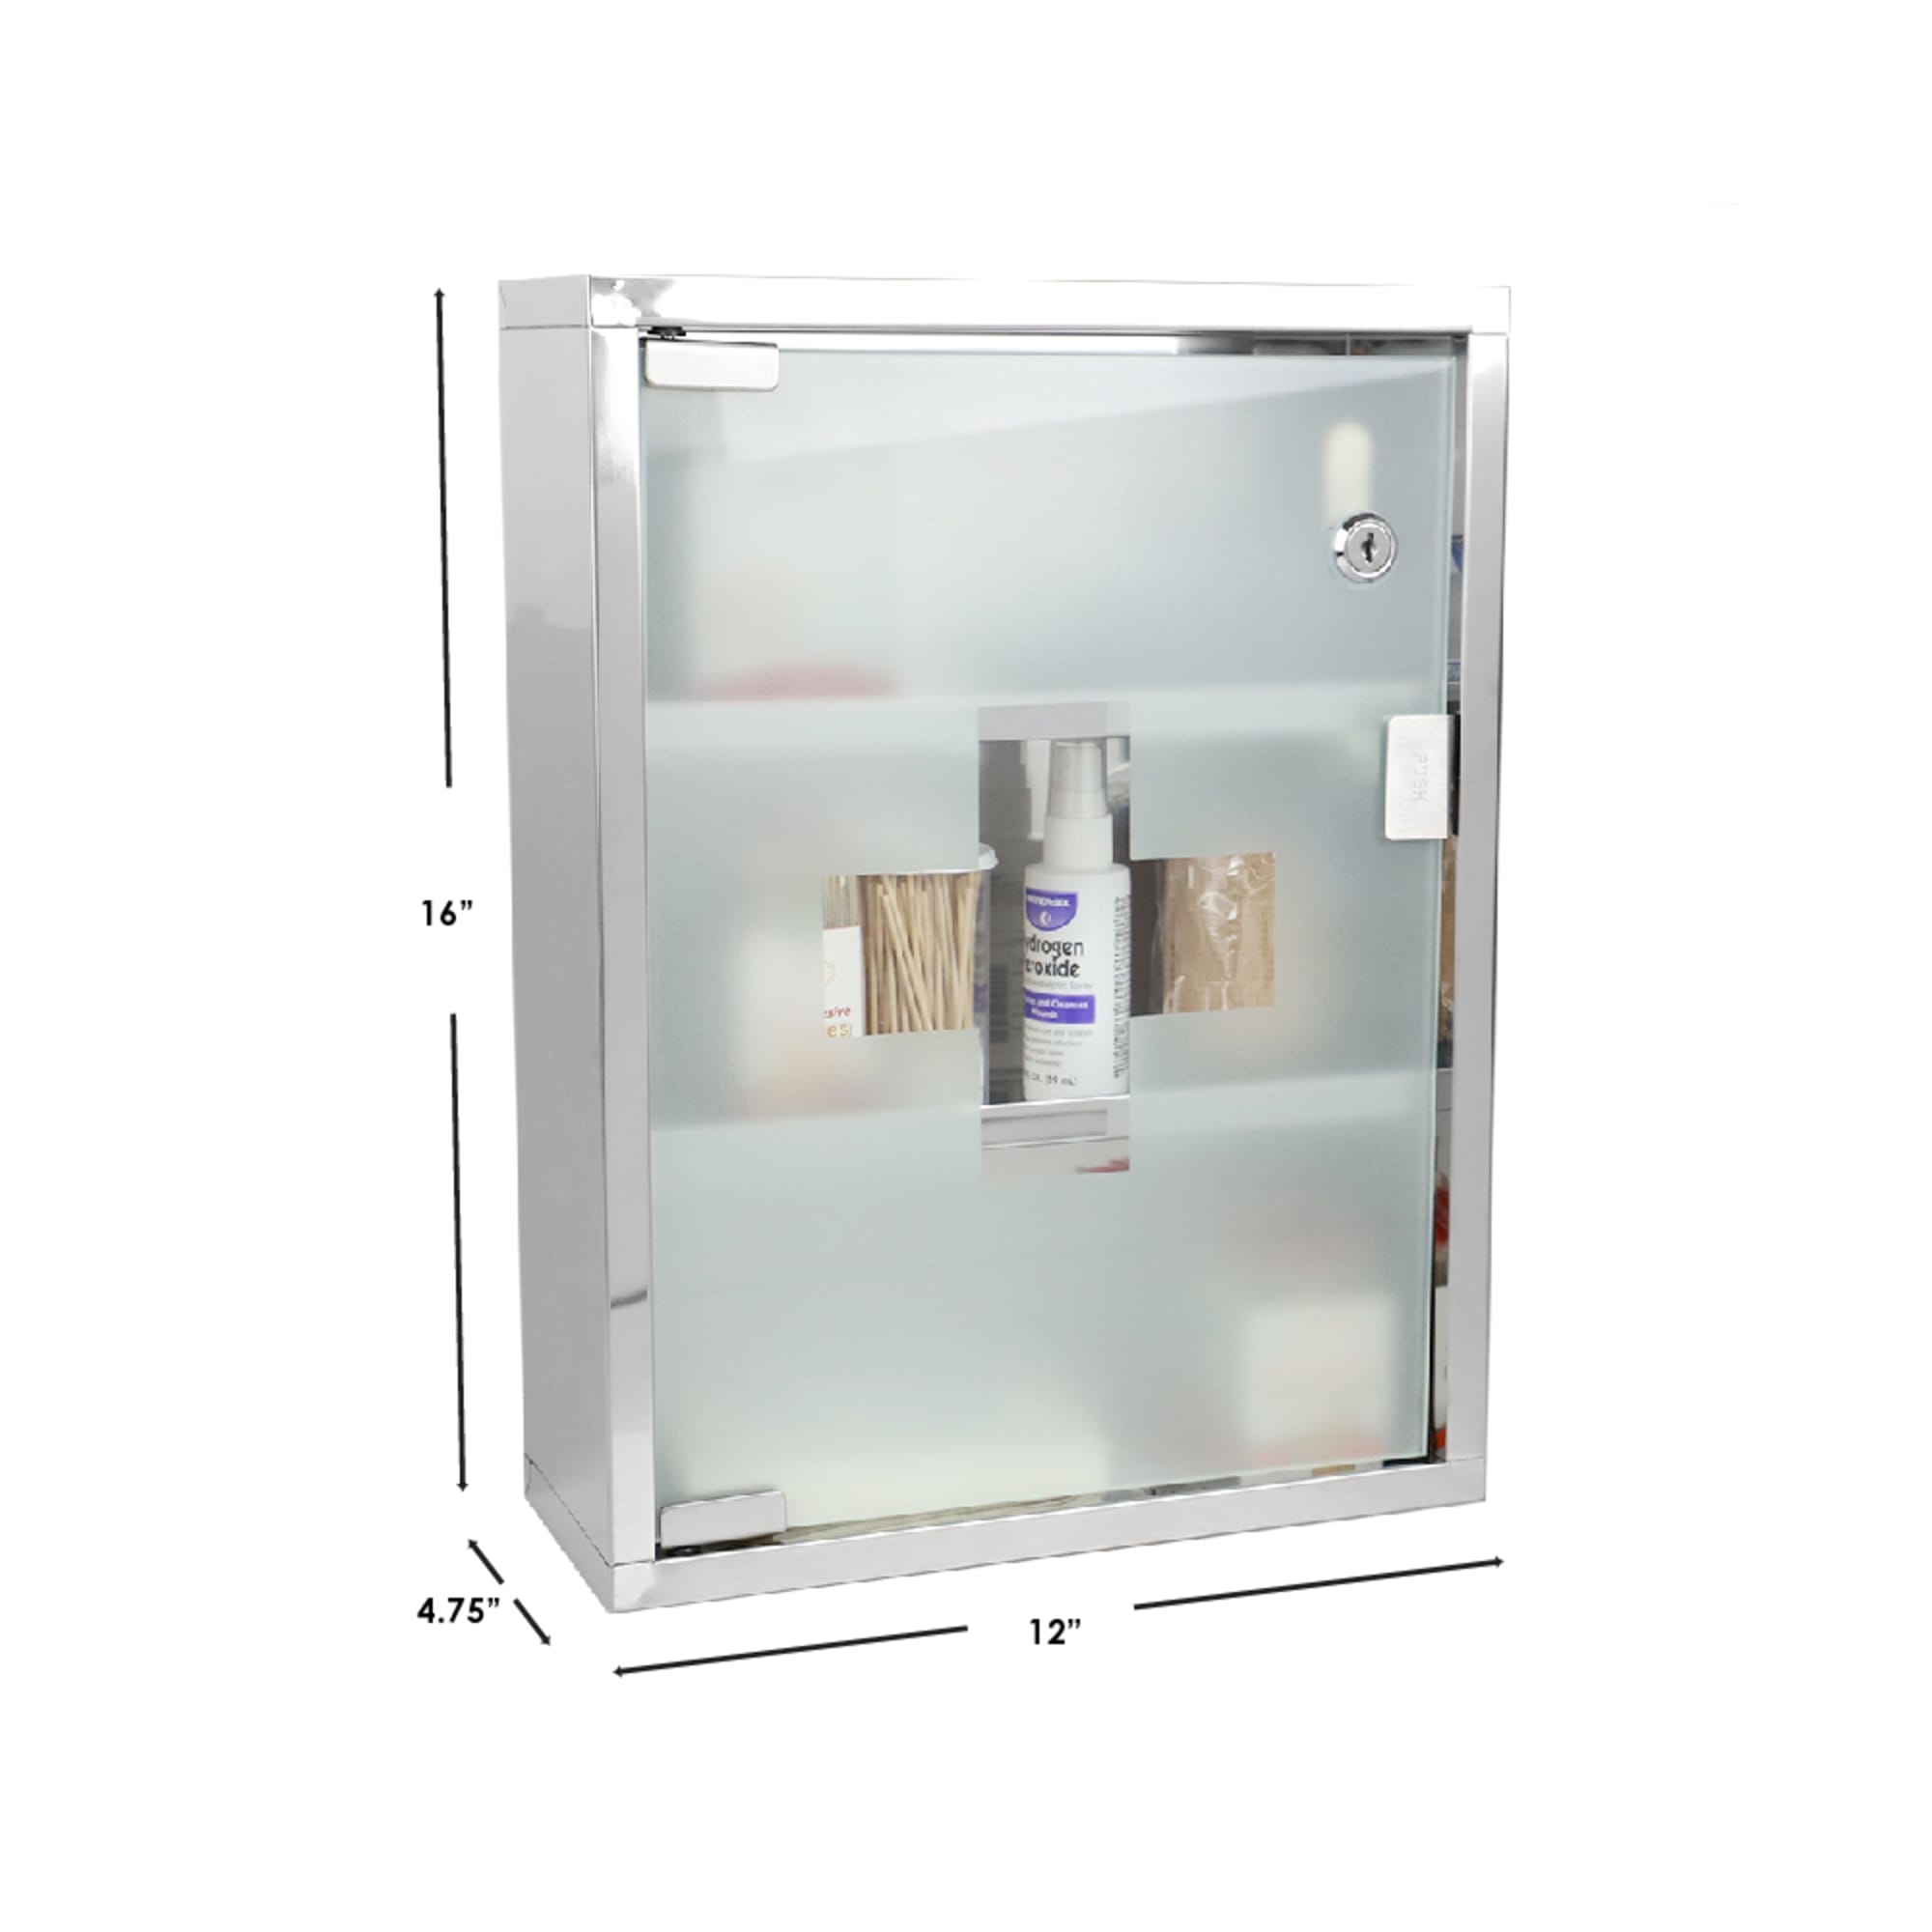 Home Basics 3 Shelf Frosted Glass Surface Mount Medicine Cabinet with Keys, Silver $25.00 EACH, CASE PACK OF 4